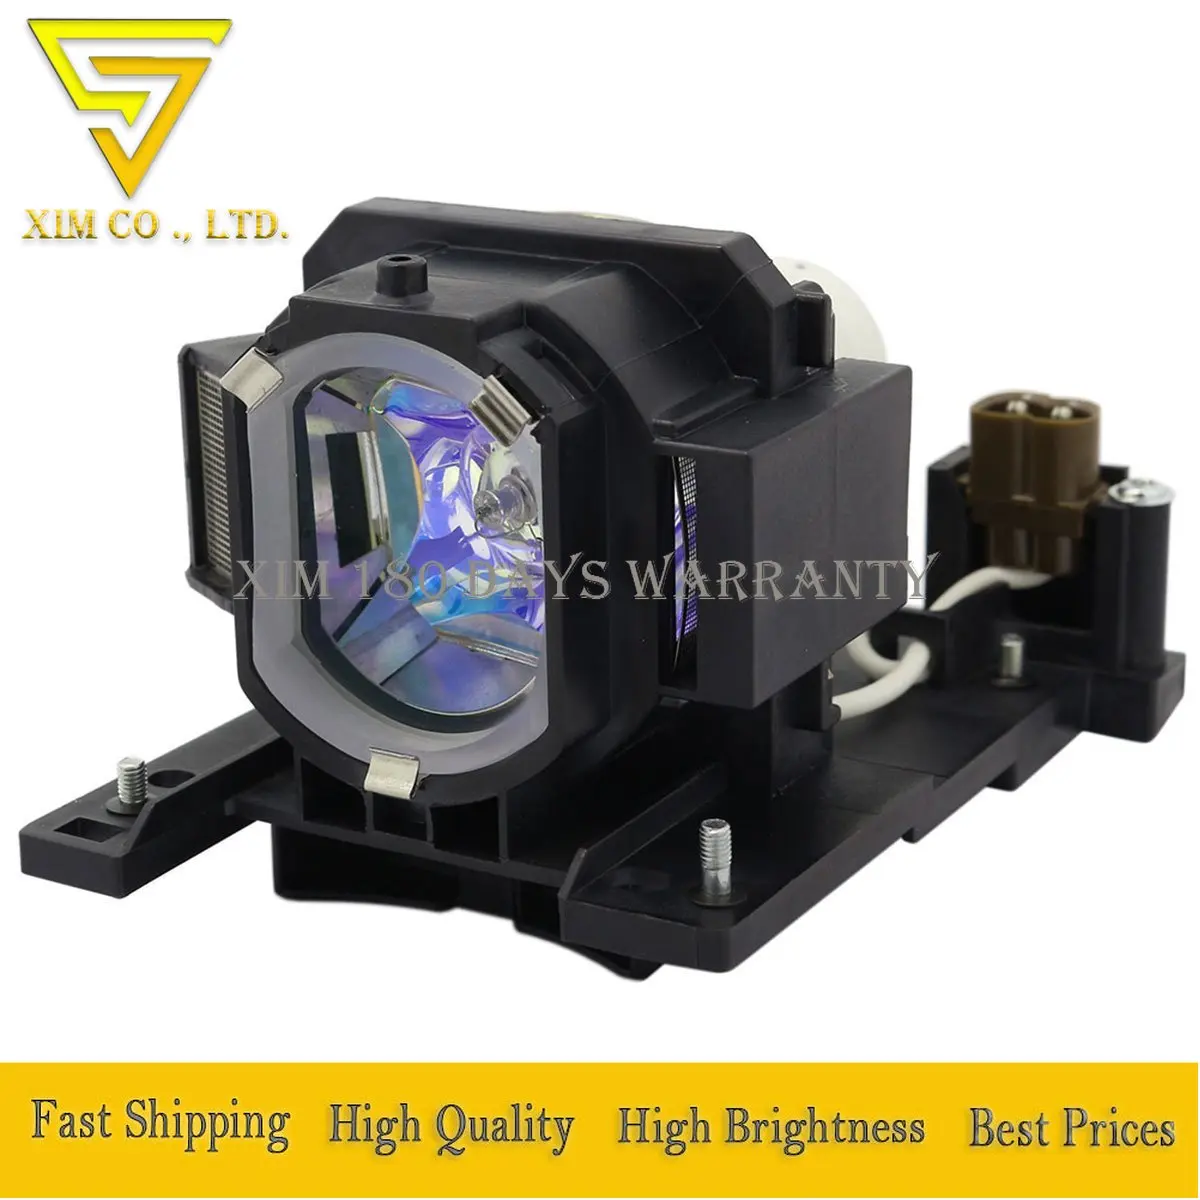 high quality DT01022 DT01026 Replacement Lamp with Housing for Hitachi CP-RX80W CP-RX78 ED-X24 CP-RX78W CP-RX80 projectors dt00893 high quality projector lamp with housing for hitachi cp a200 cp a52 ed a10 ed a101 ed a111 ed a6 ed a7 hcp a7